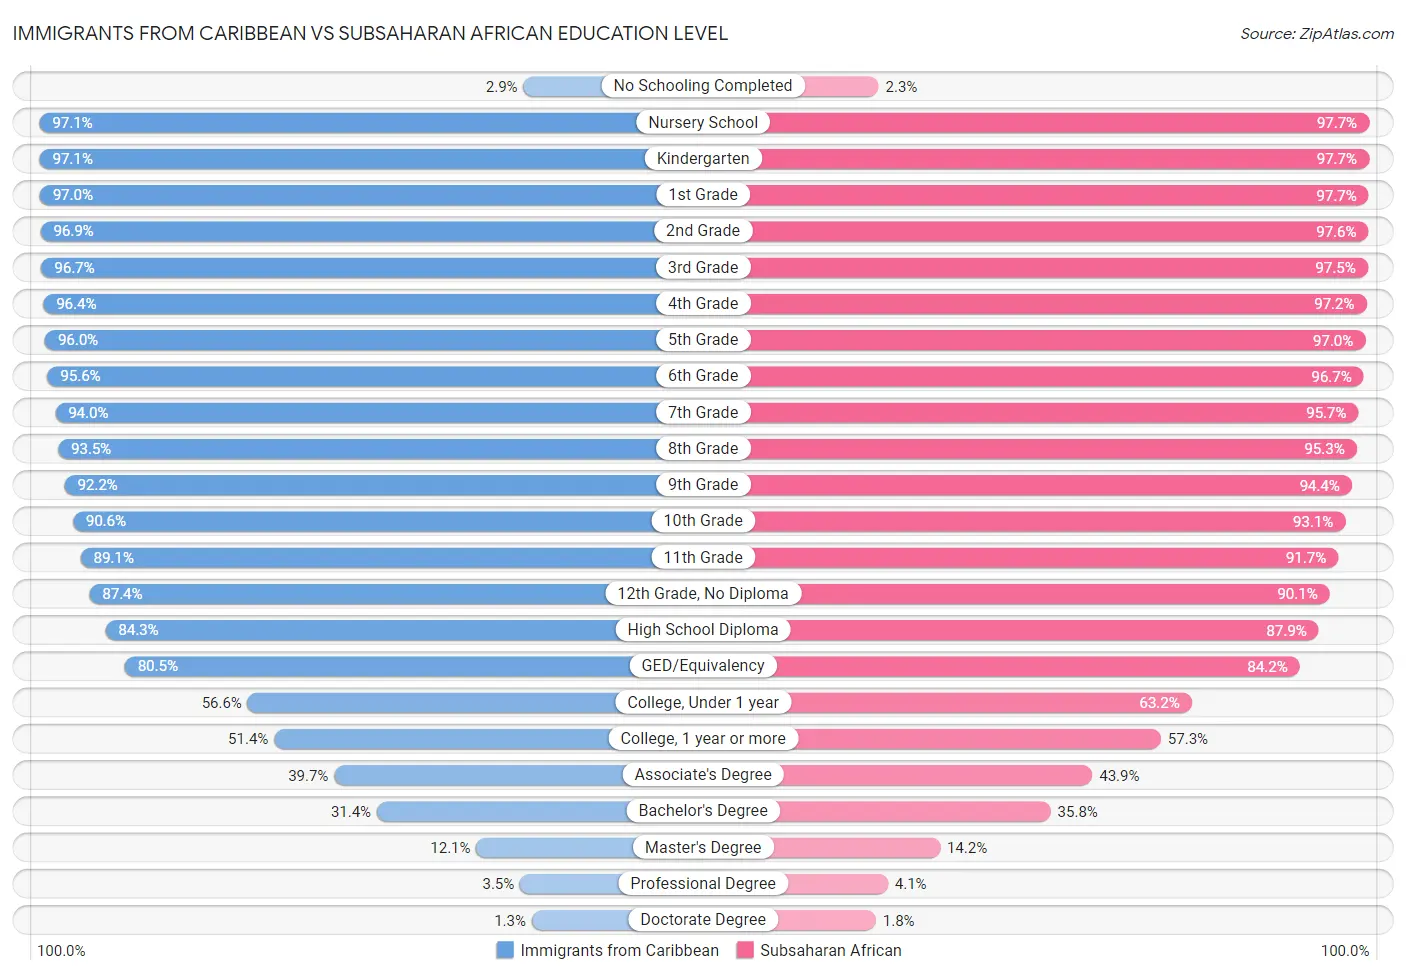 Immigrants from Caribbean vs Subsaharan African Education Level